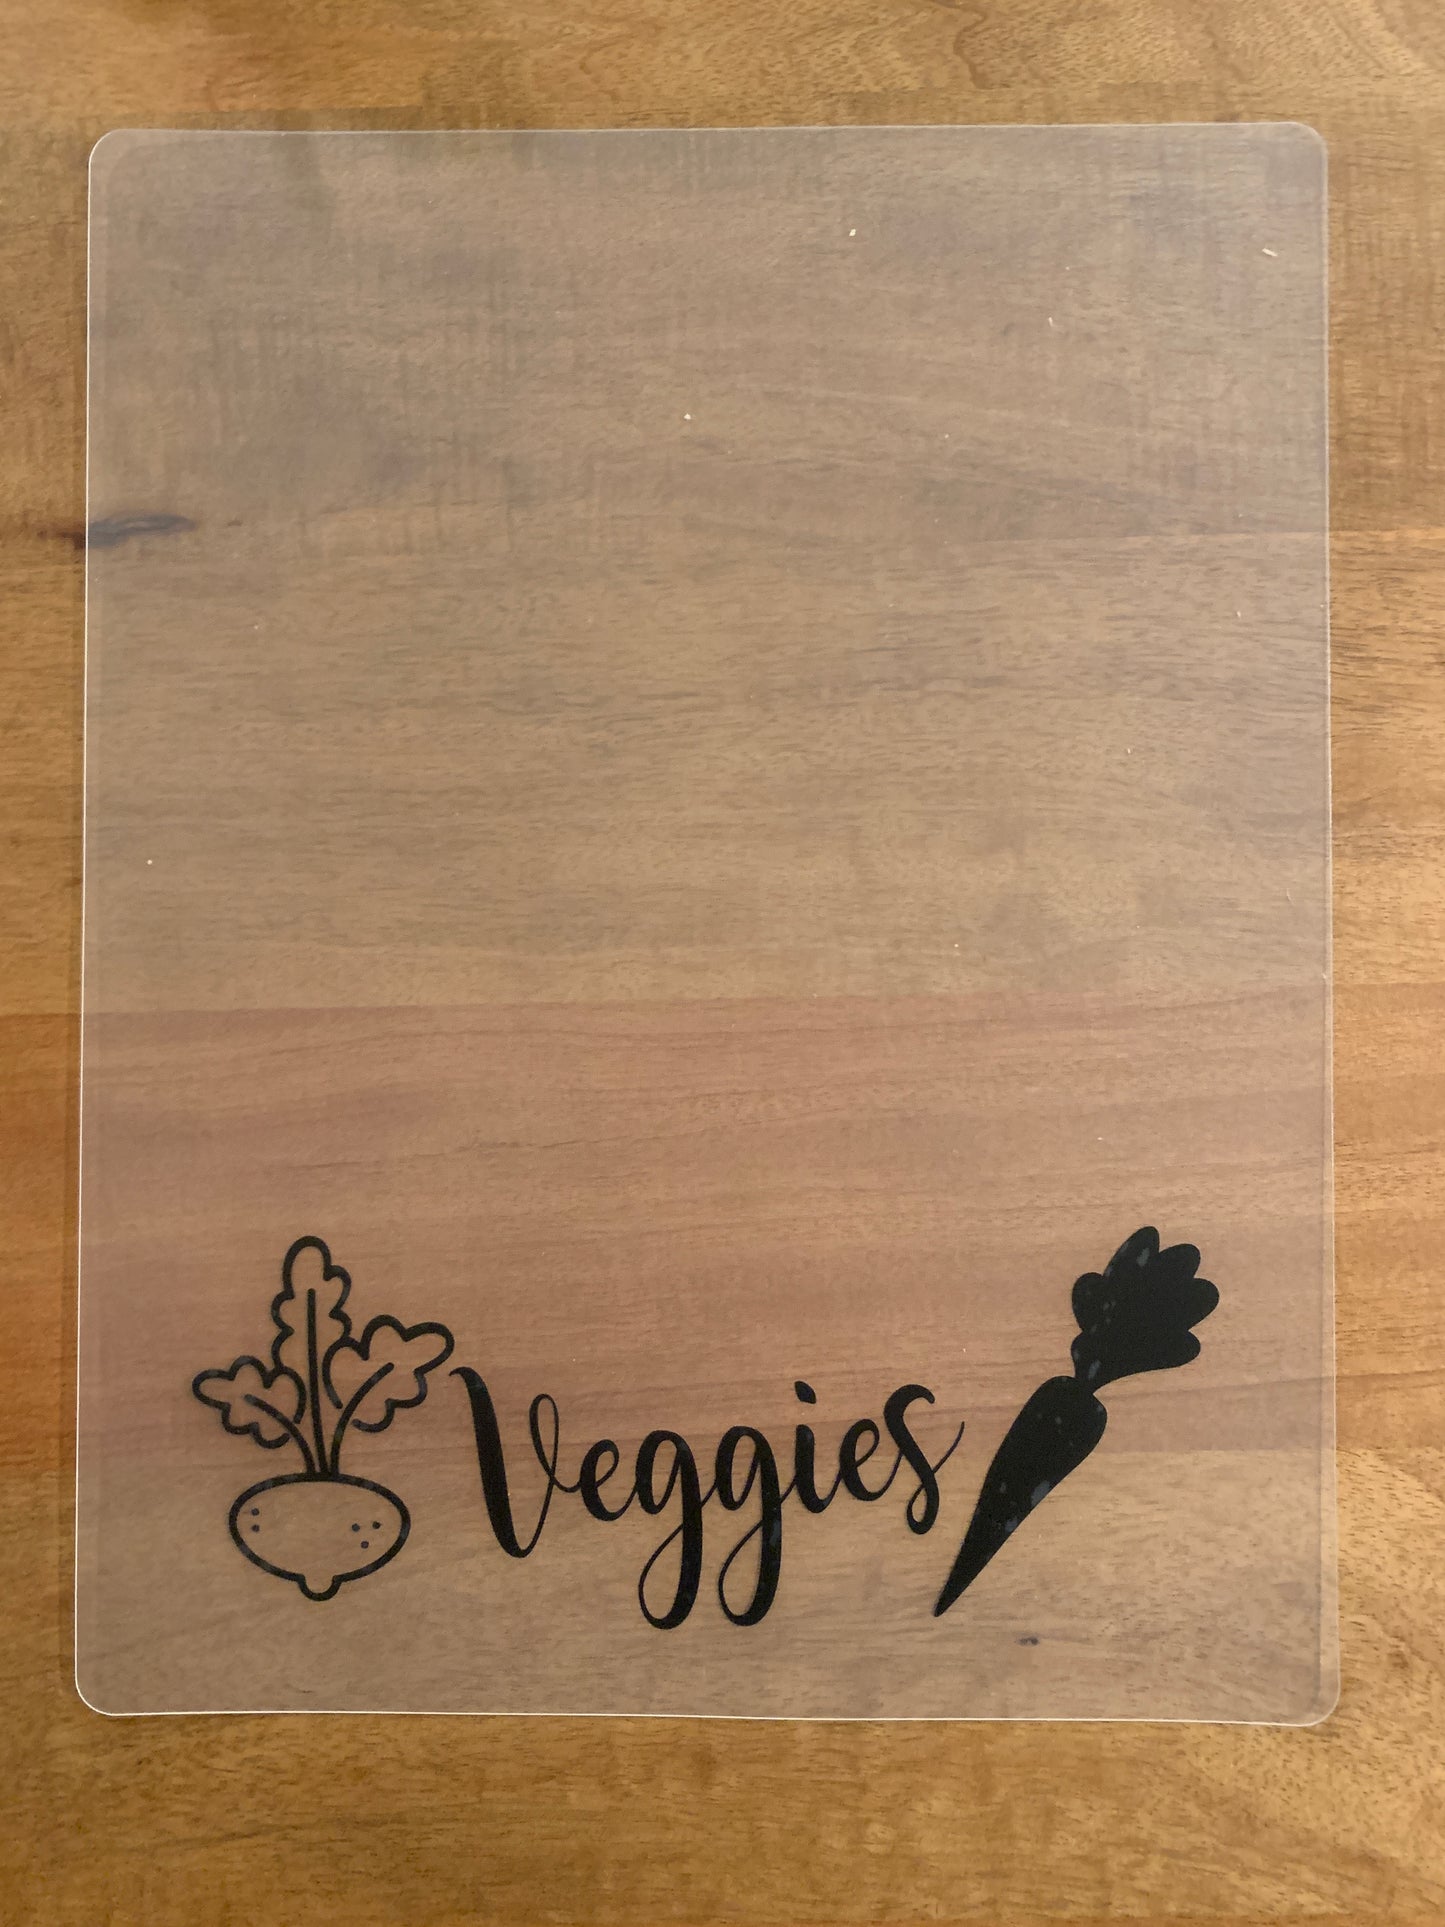 Veggies - The one I use every day! 